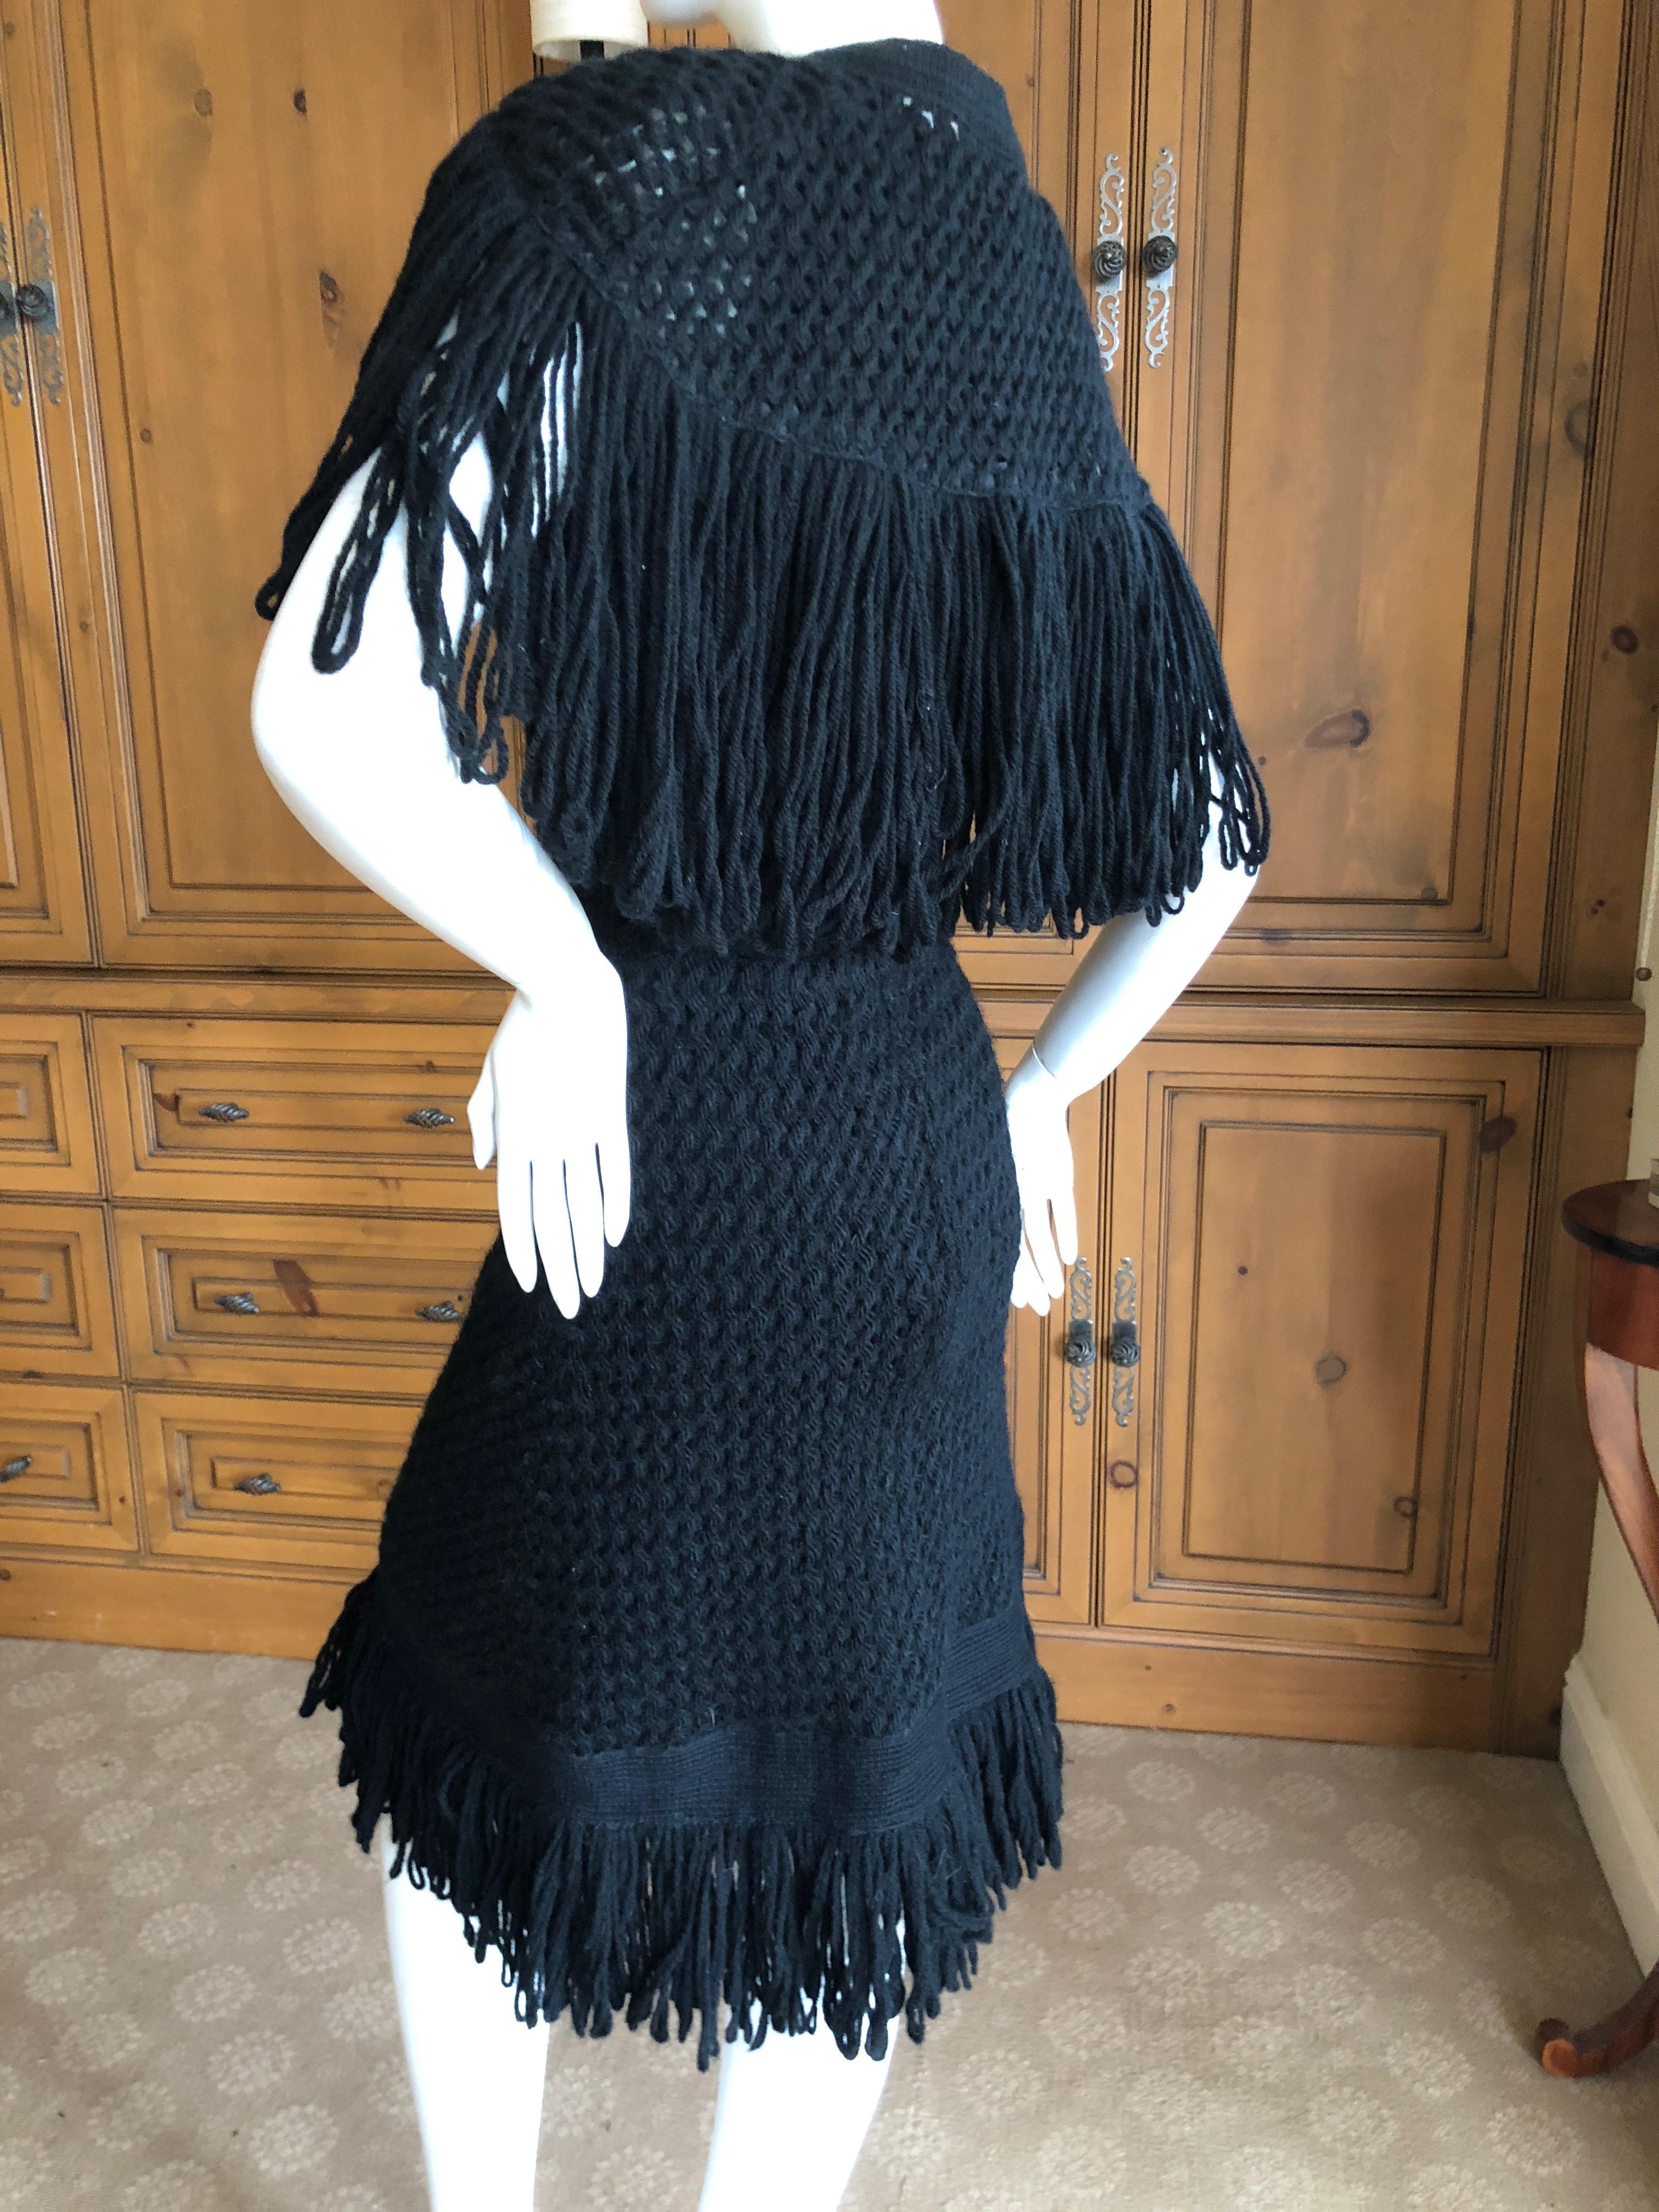 Cardinali Black Silk Lined Crochet Dress with Matching Fringed Shawl Fall 1971  For Sale 8